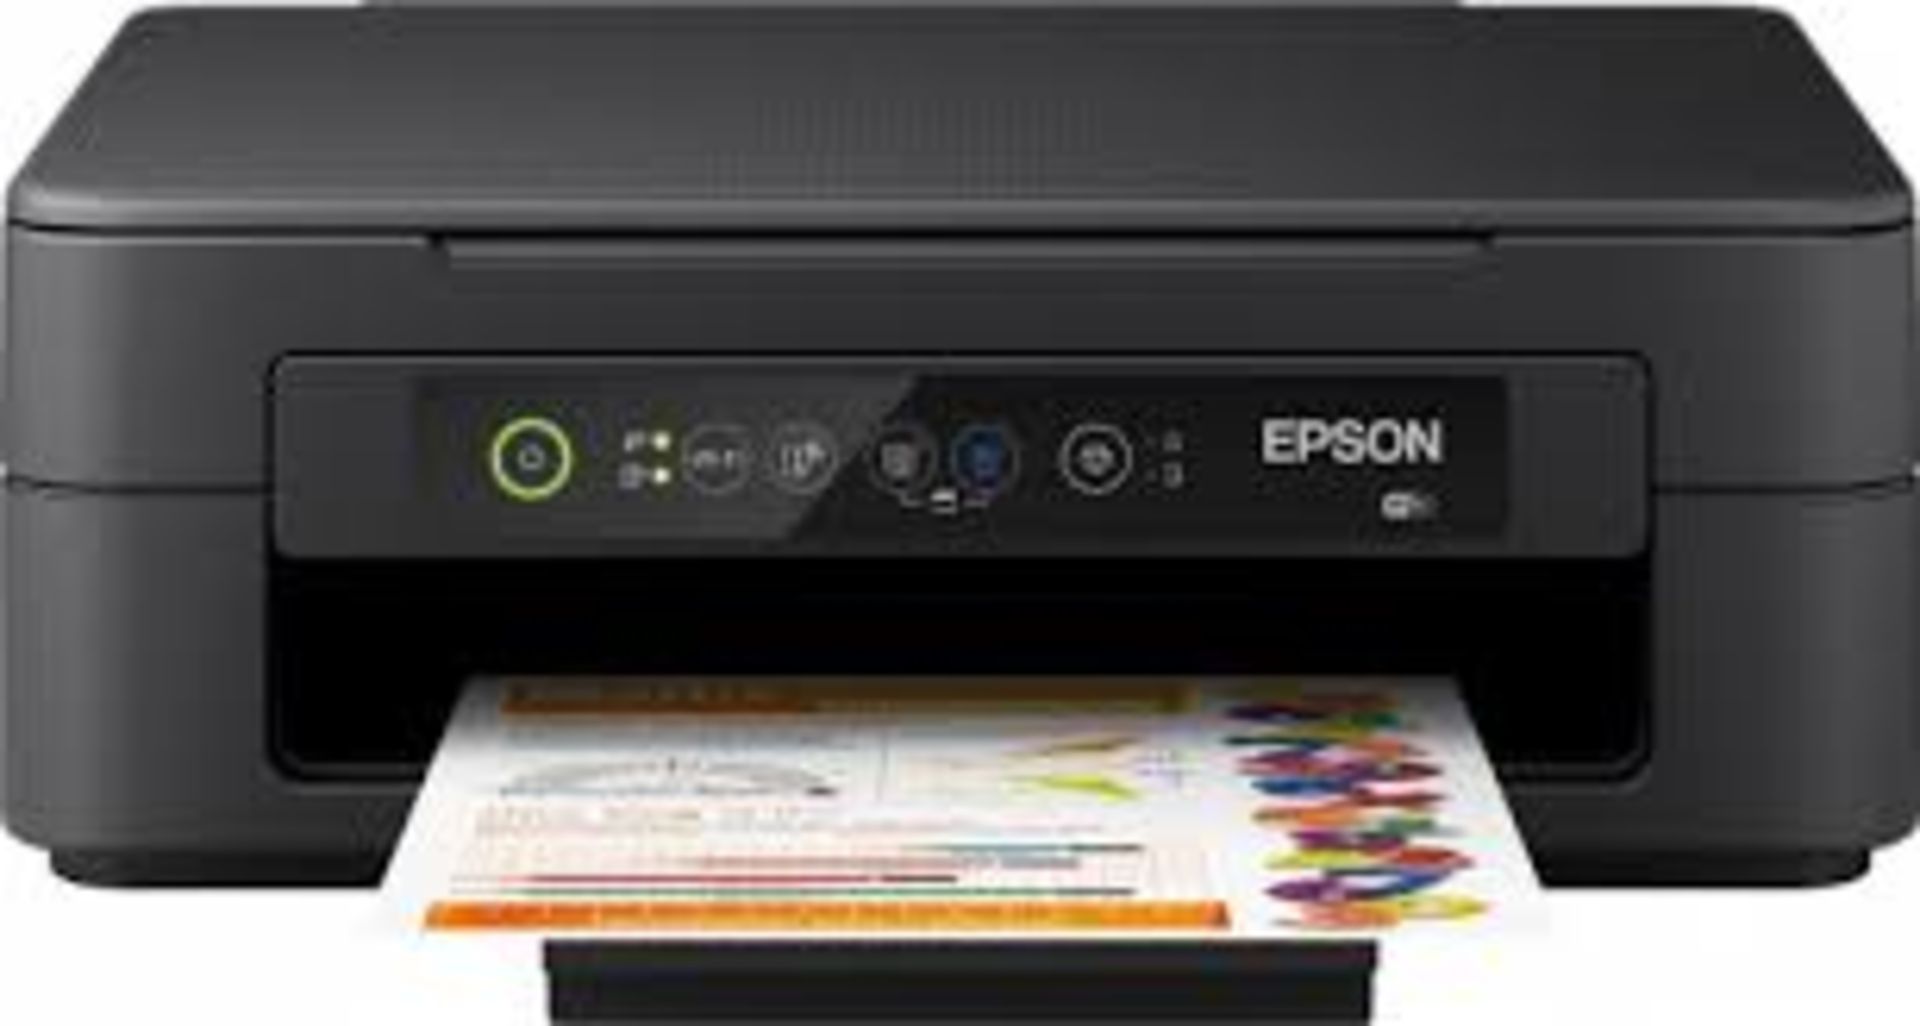 Boxed Epson Expression XP2100 All In One Printer Scanner Copier with WIFI RRP £55 (Public Viewing